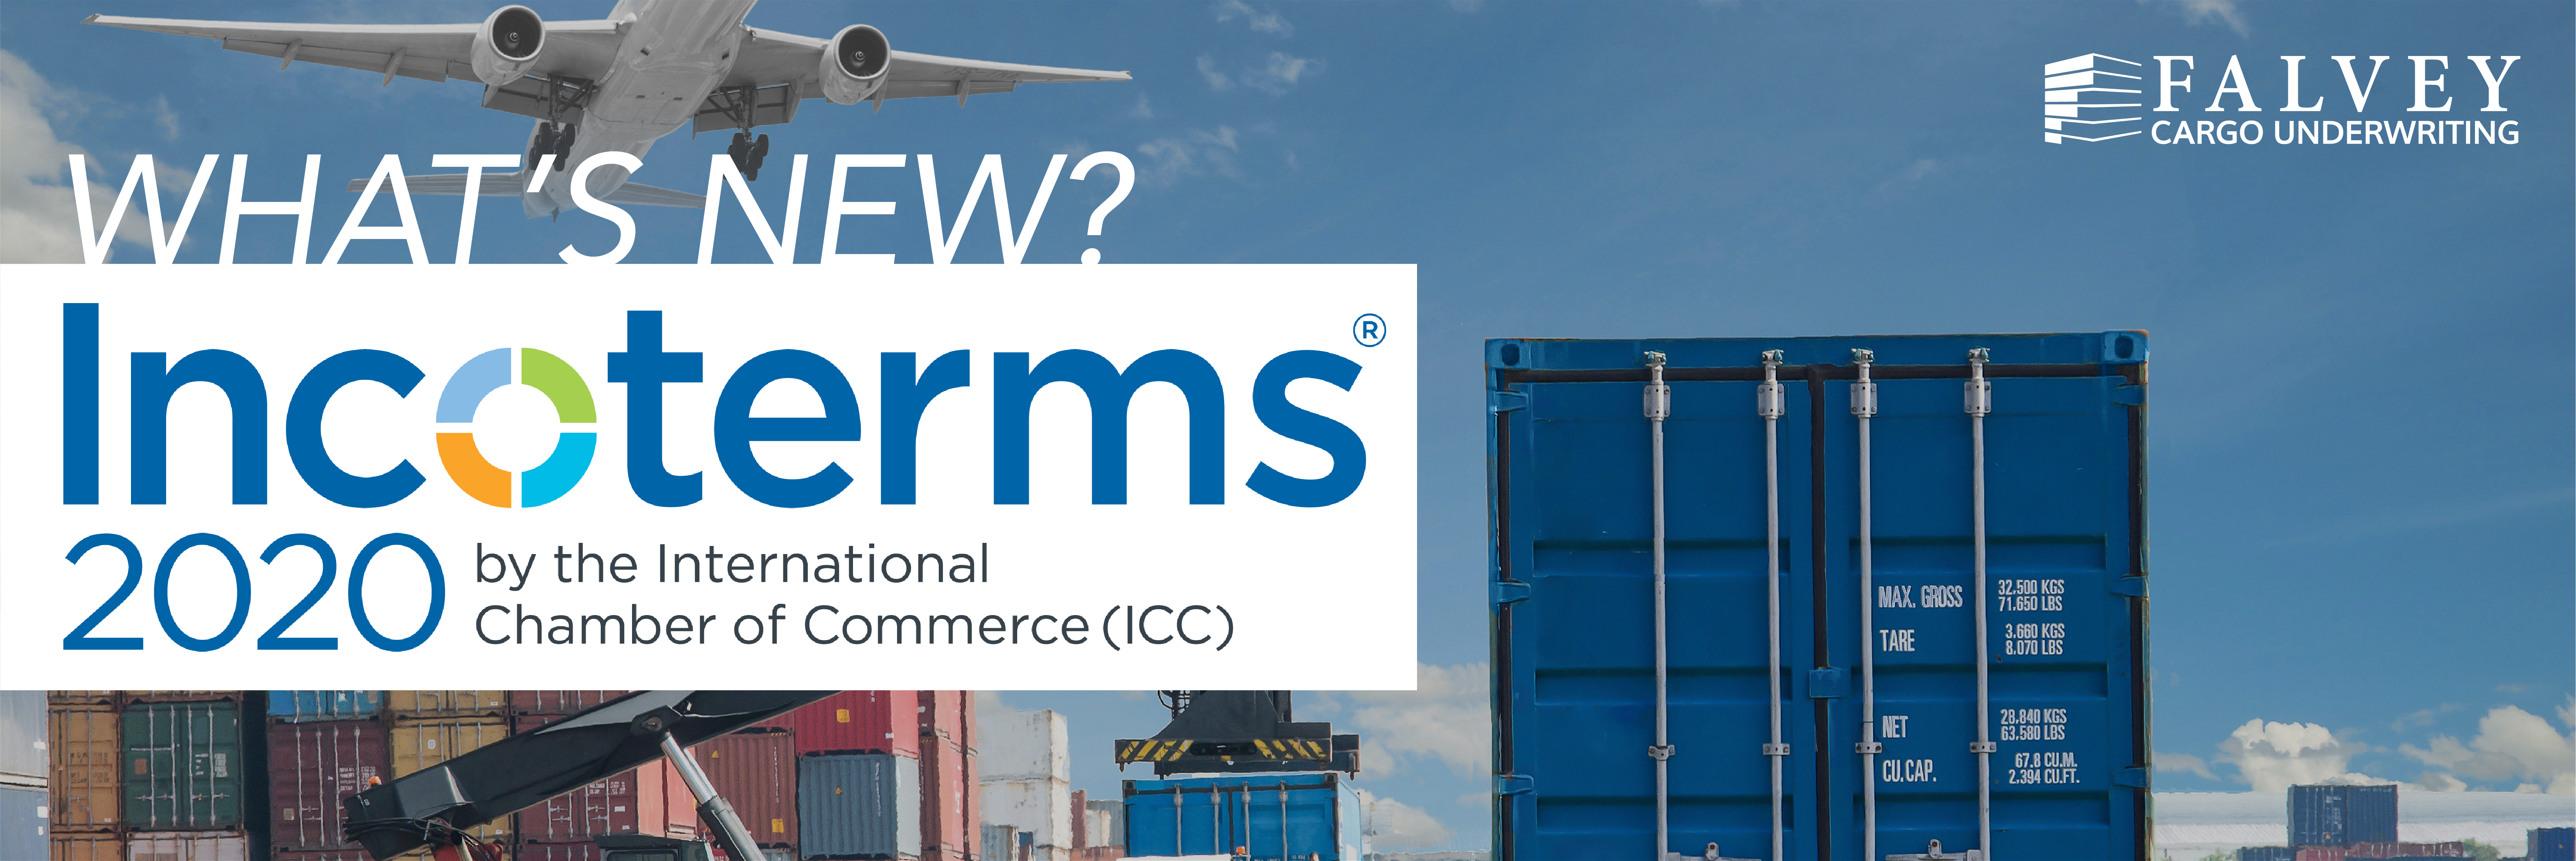 incoterms 2020 banner